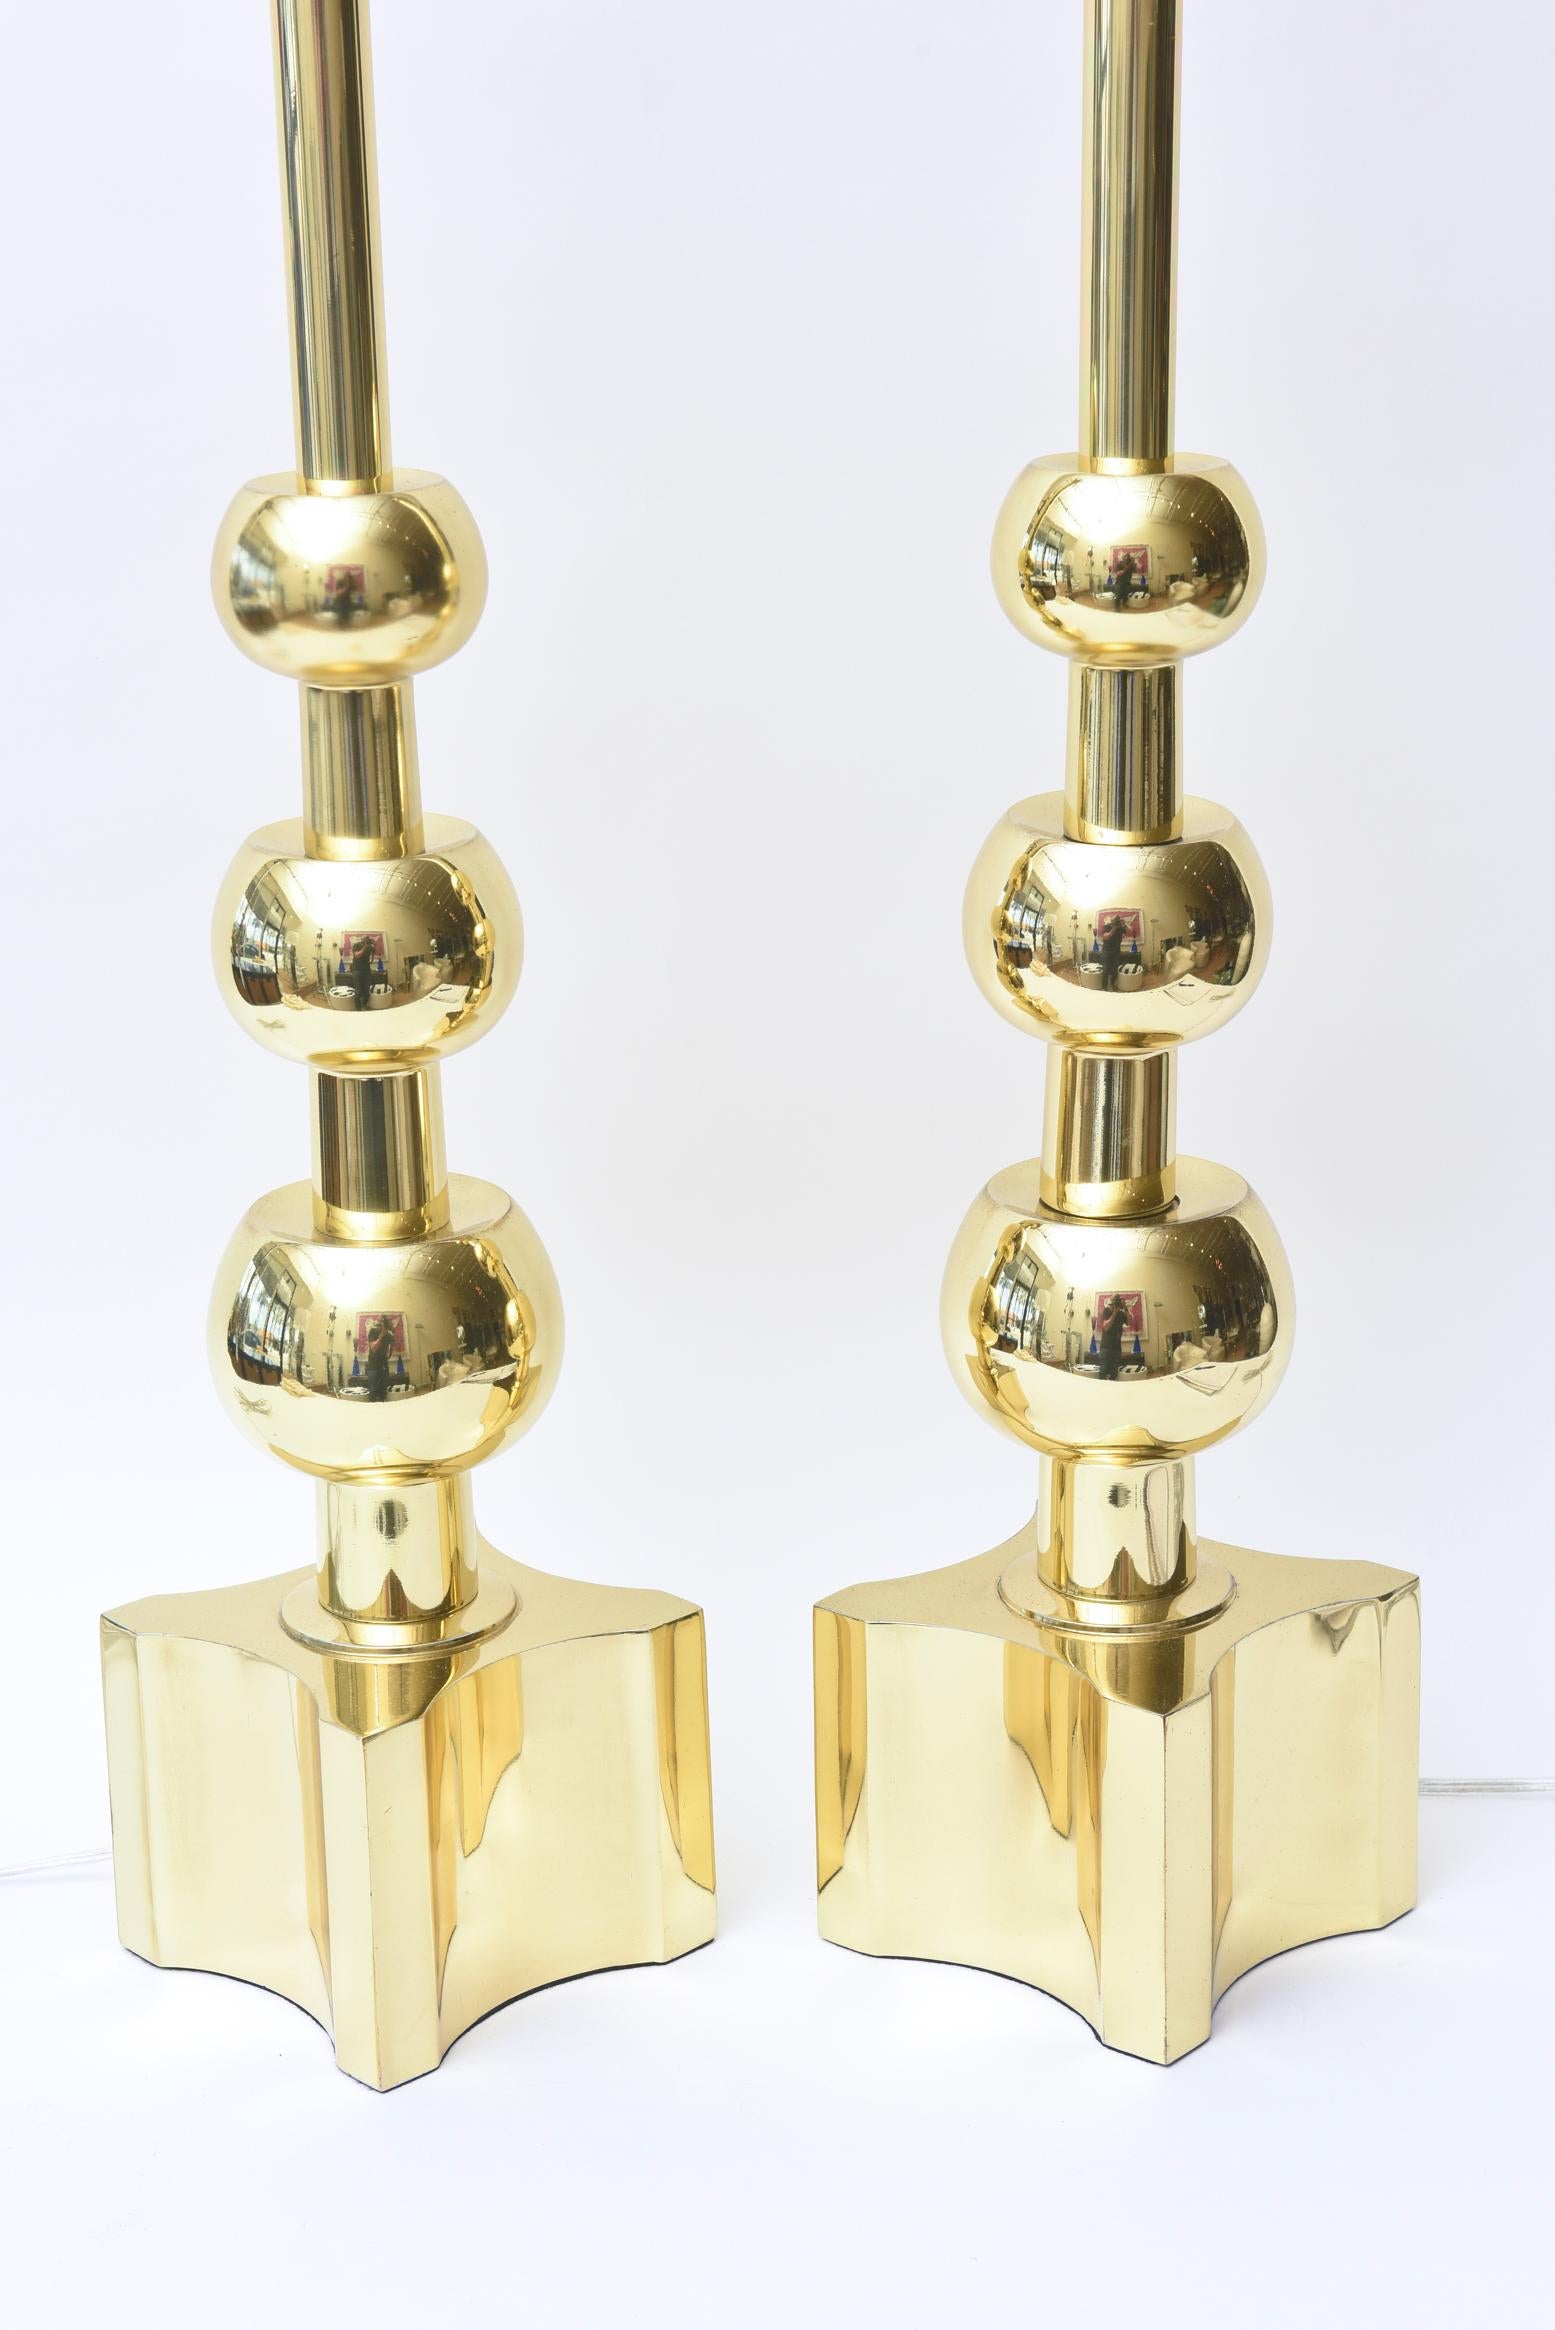 These fabulous vintage newly brass-plated restored Tommi Parzinger for Stiffel Lamp Co. pair of Mid-Century Modernist ball lamps are timeless. They are from the late 1950s or early 1960s. They have been rewired and do not come with shades or harps.